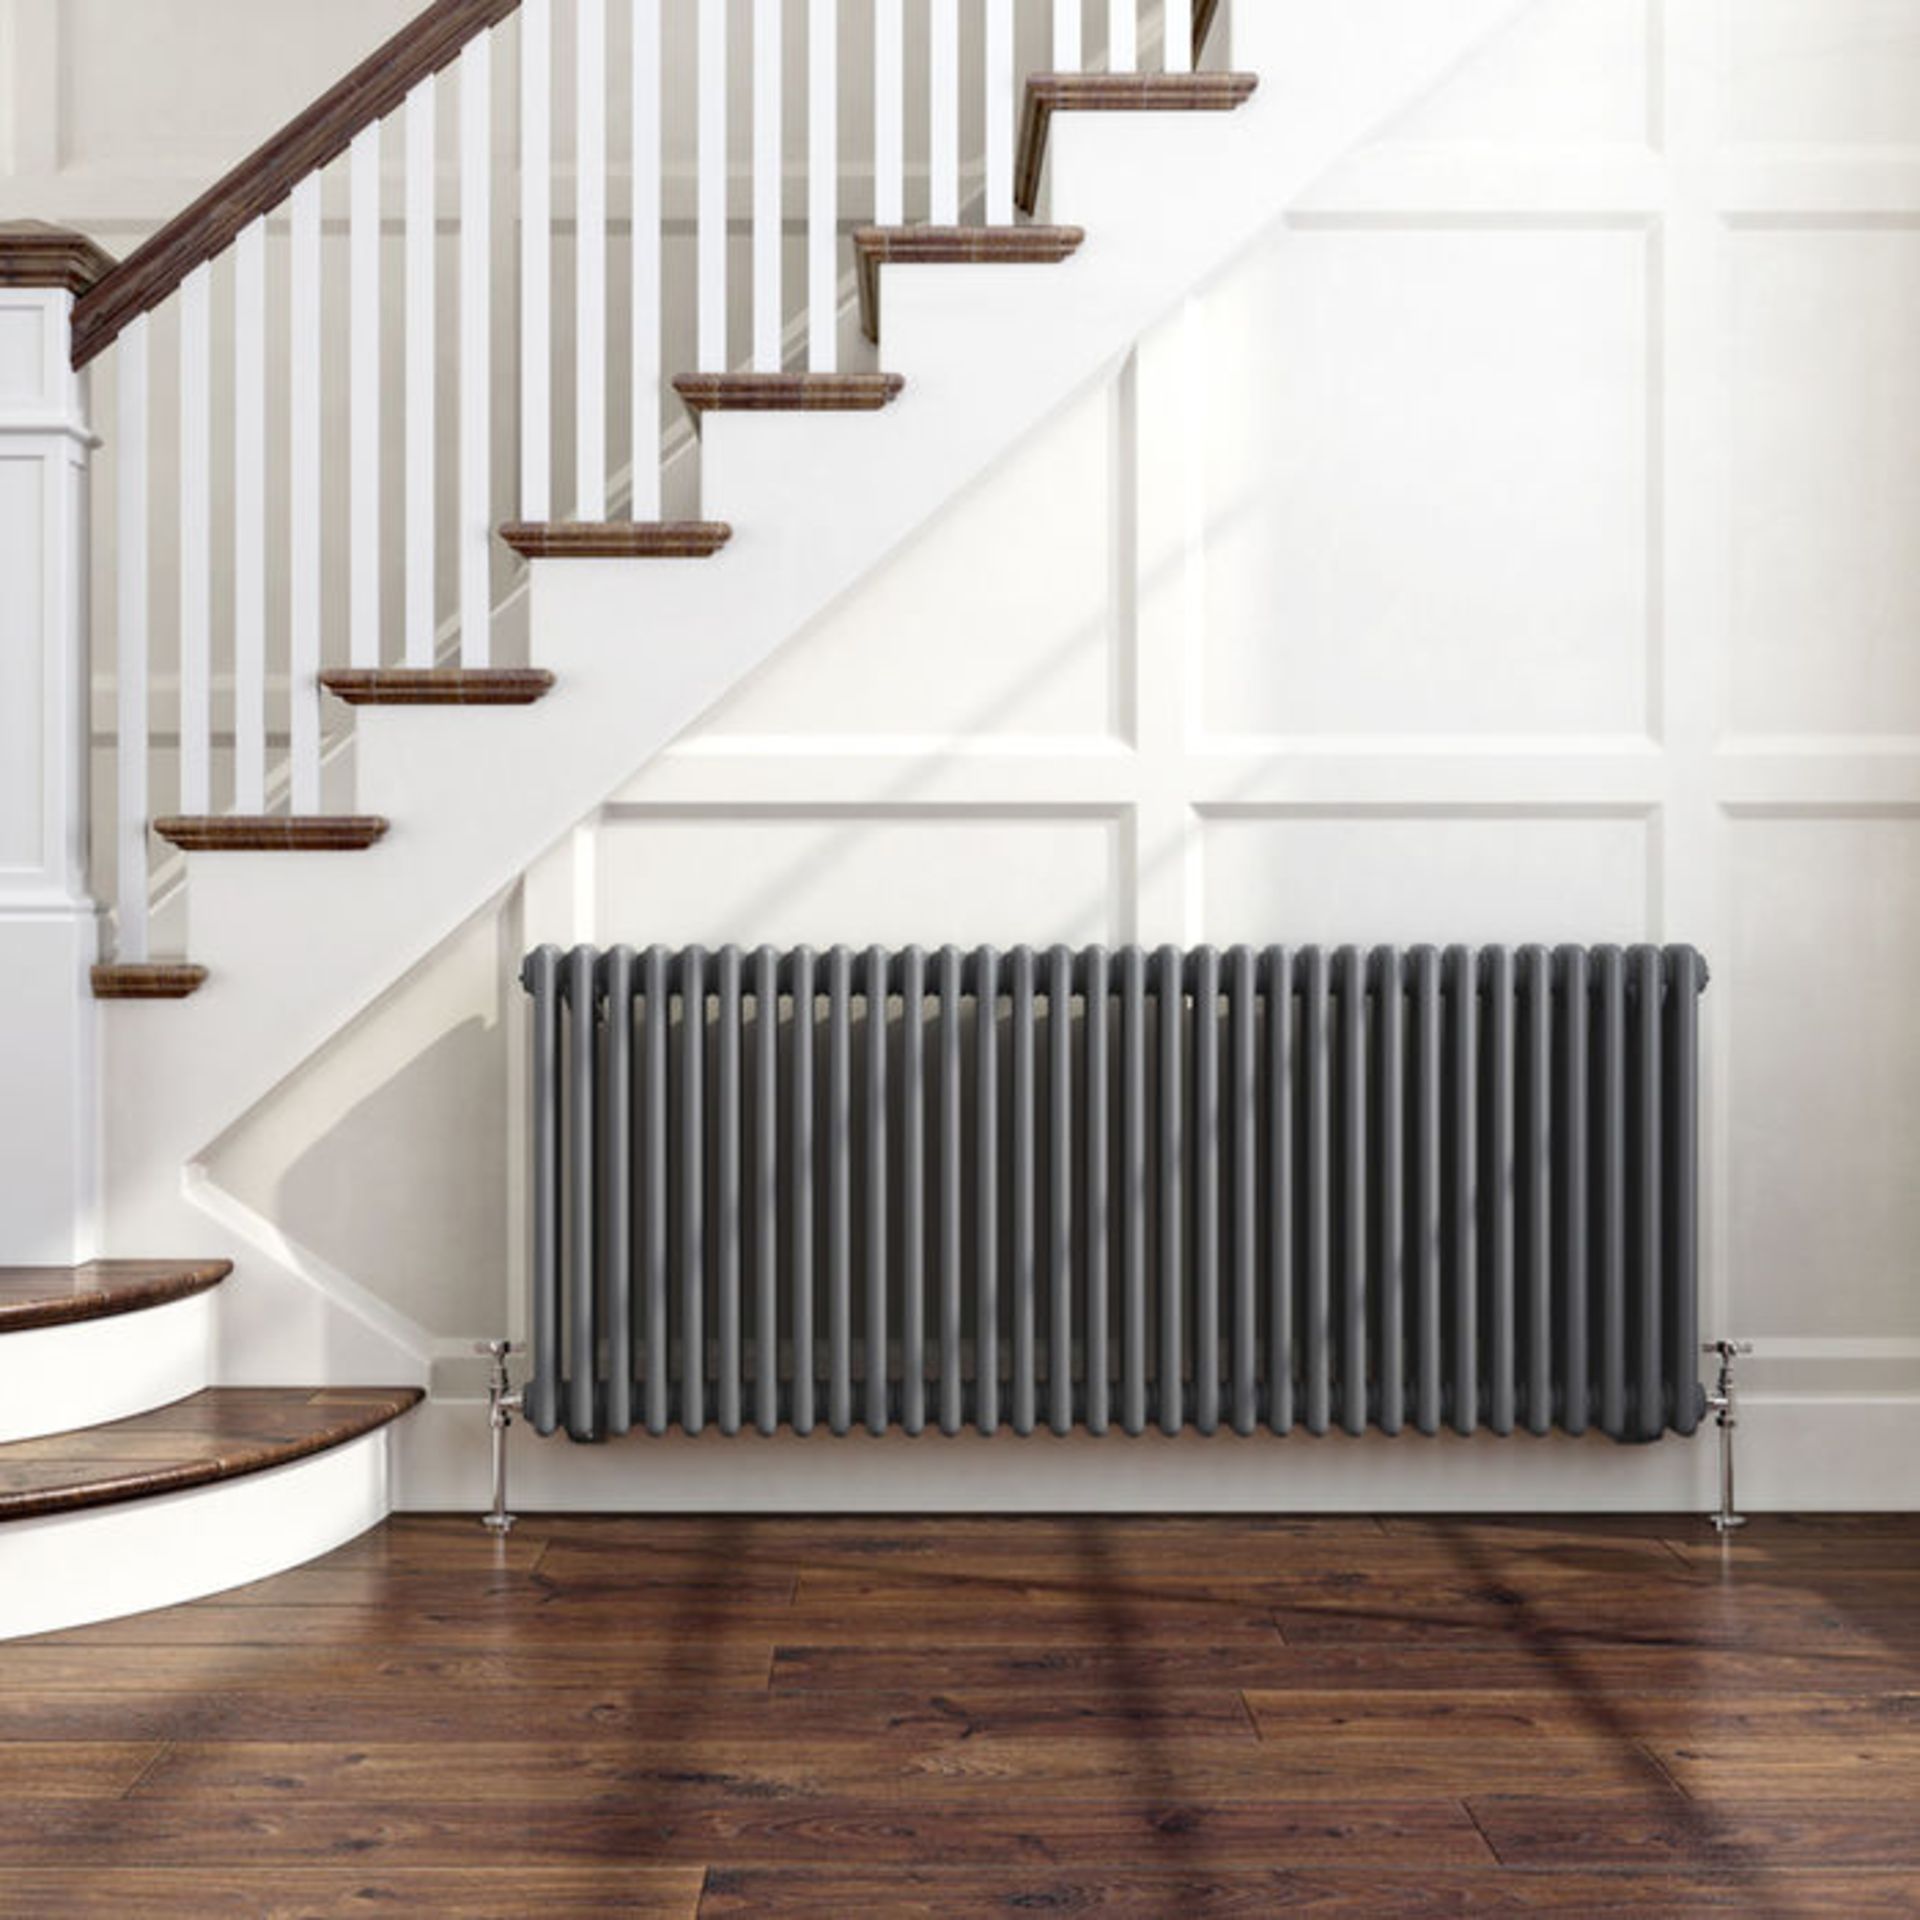 (PT261) 600x1444mm Anthracite Triple Panel Horizontal Colosseum Traditional Radiator. RRP £609.99. - Image 3 of 4